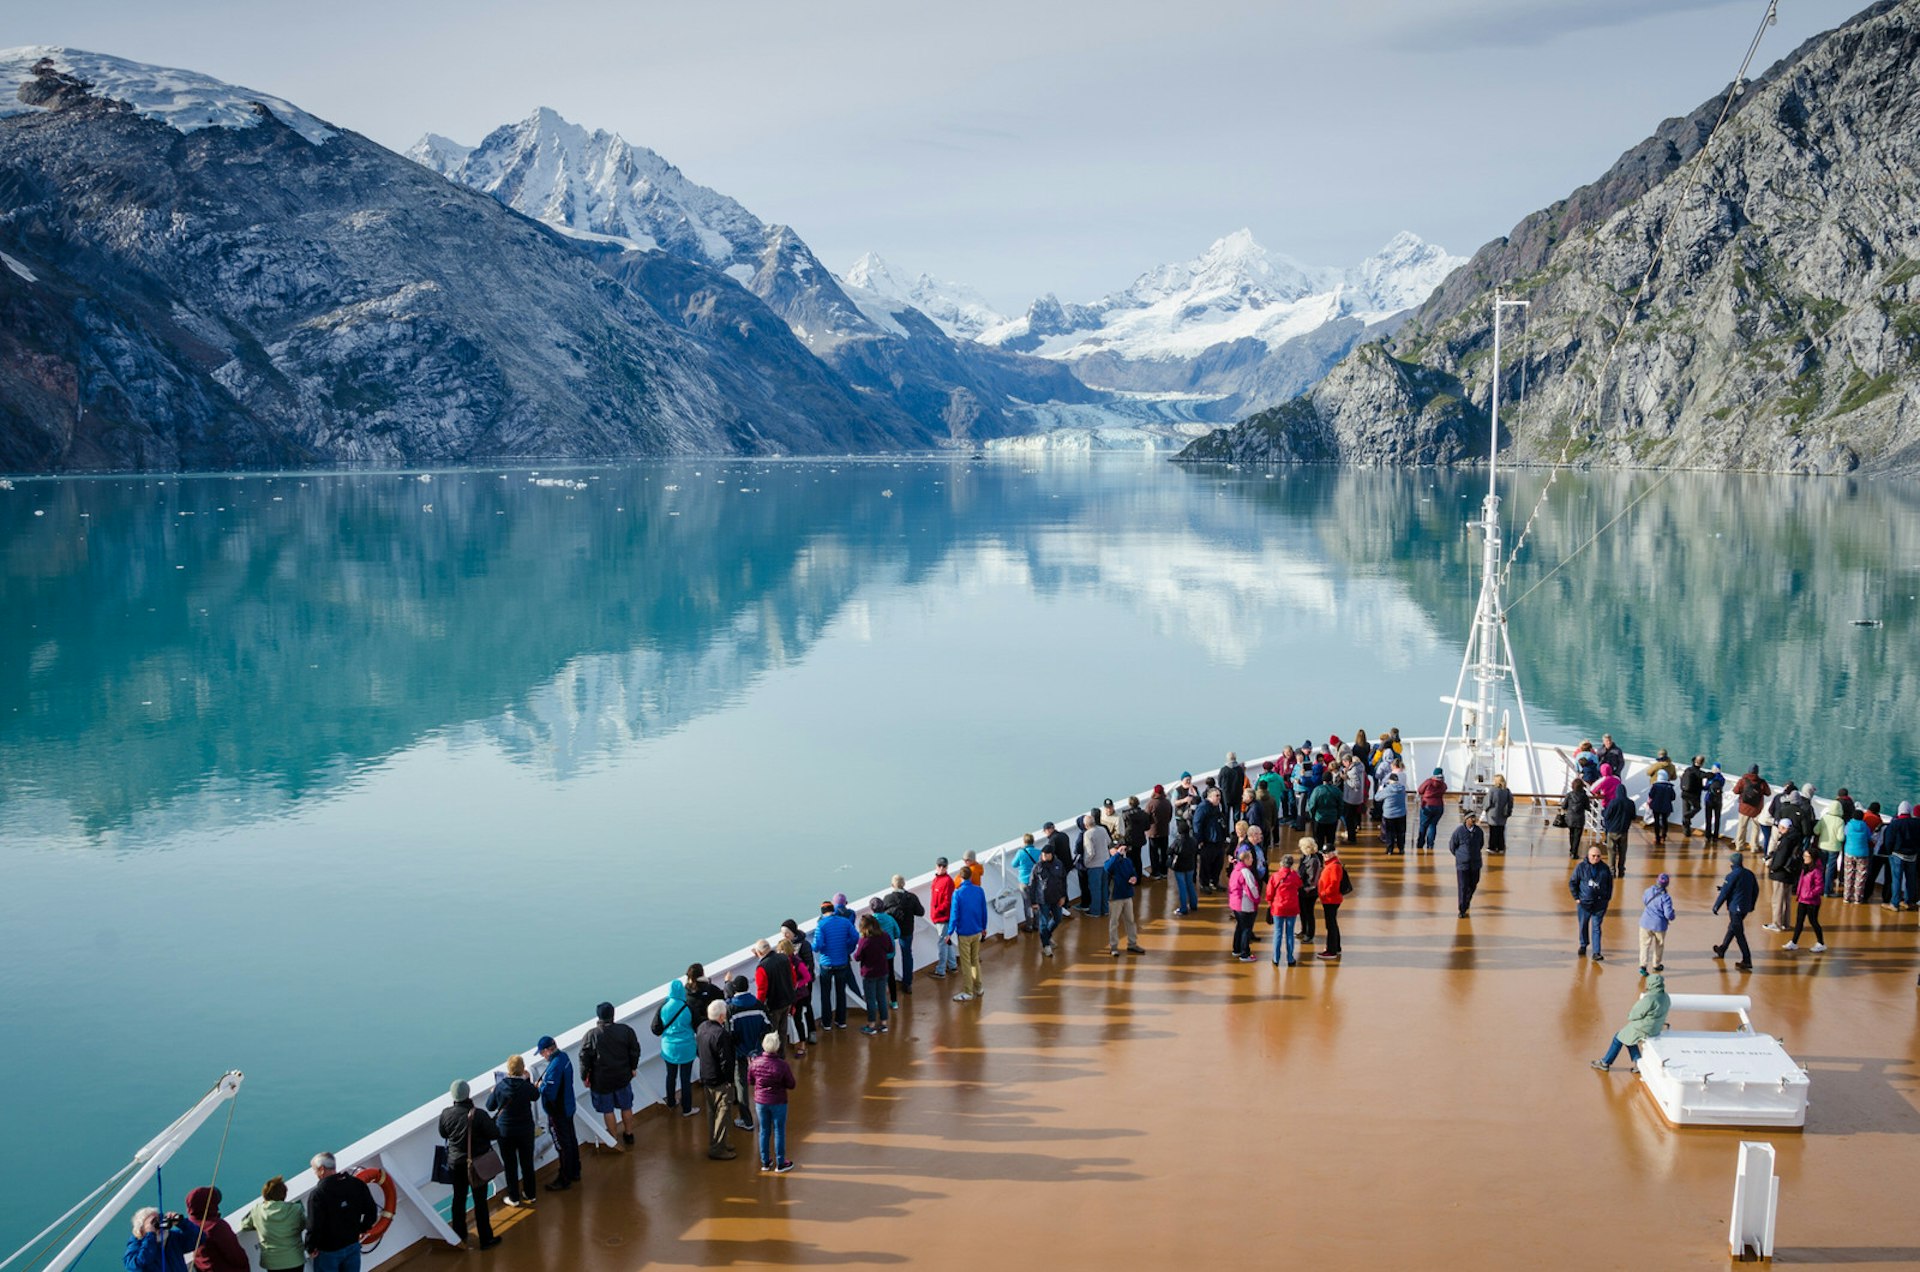 Cruise ship passengers get a close-up view of the majestic glaciers as they sail in Glacier Bay National Park and Preserve in Southeast Alaska